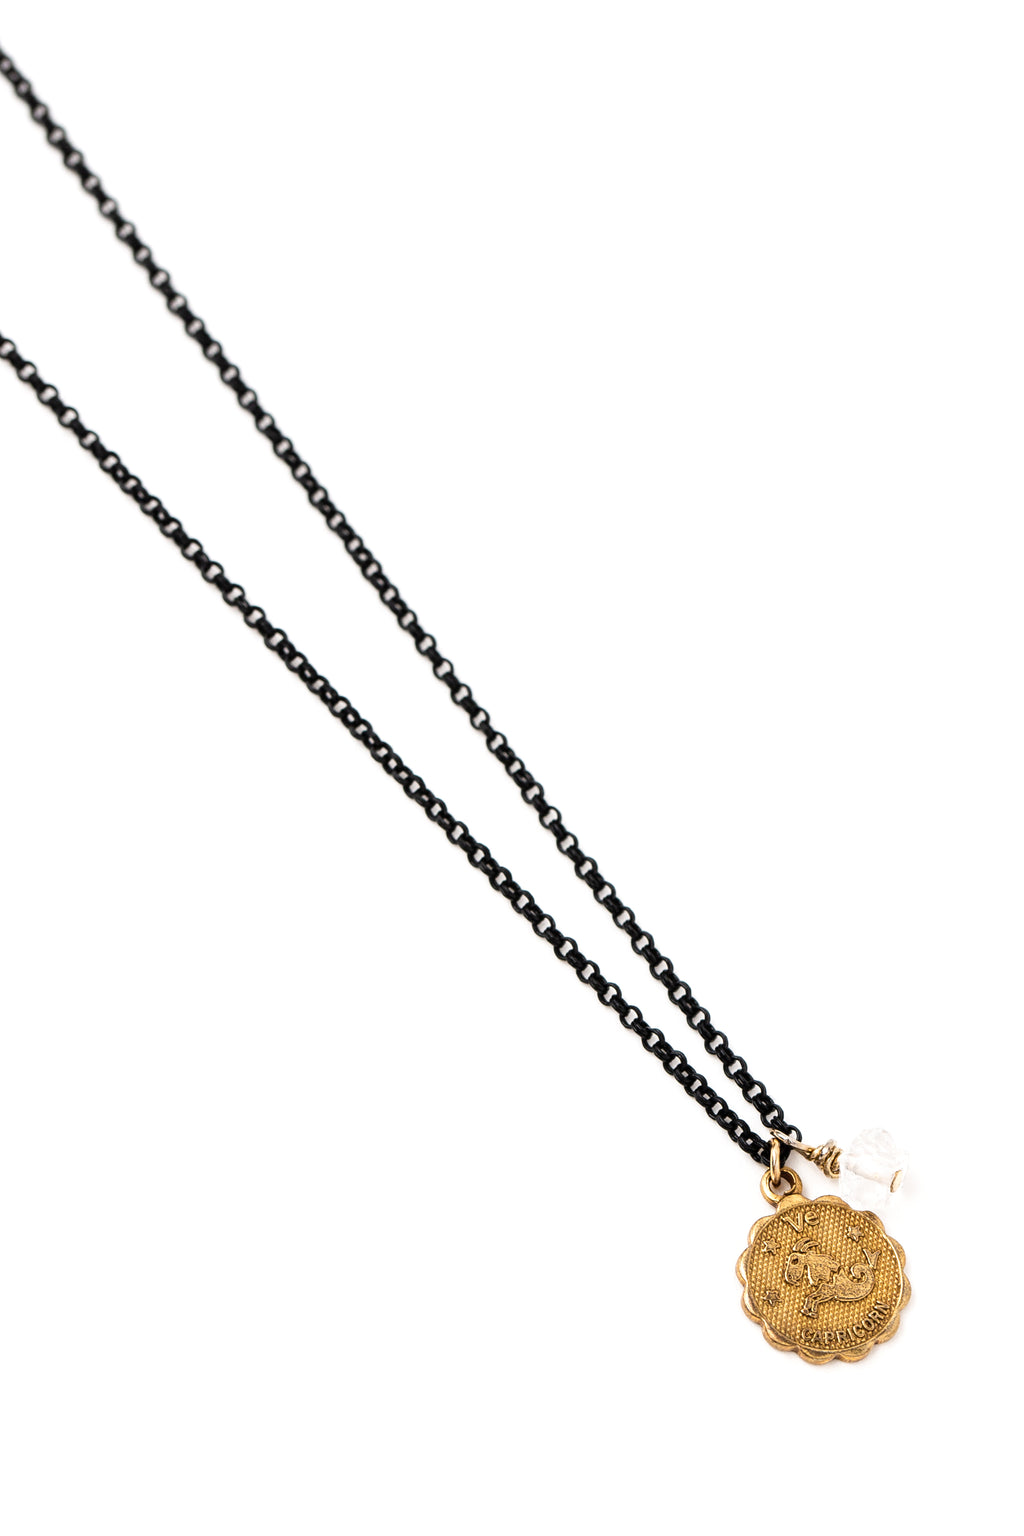 Zodiac Charm Necklace w/ Two-Point Crystal on Black Rolo Chain